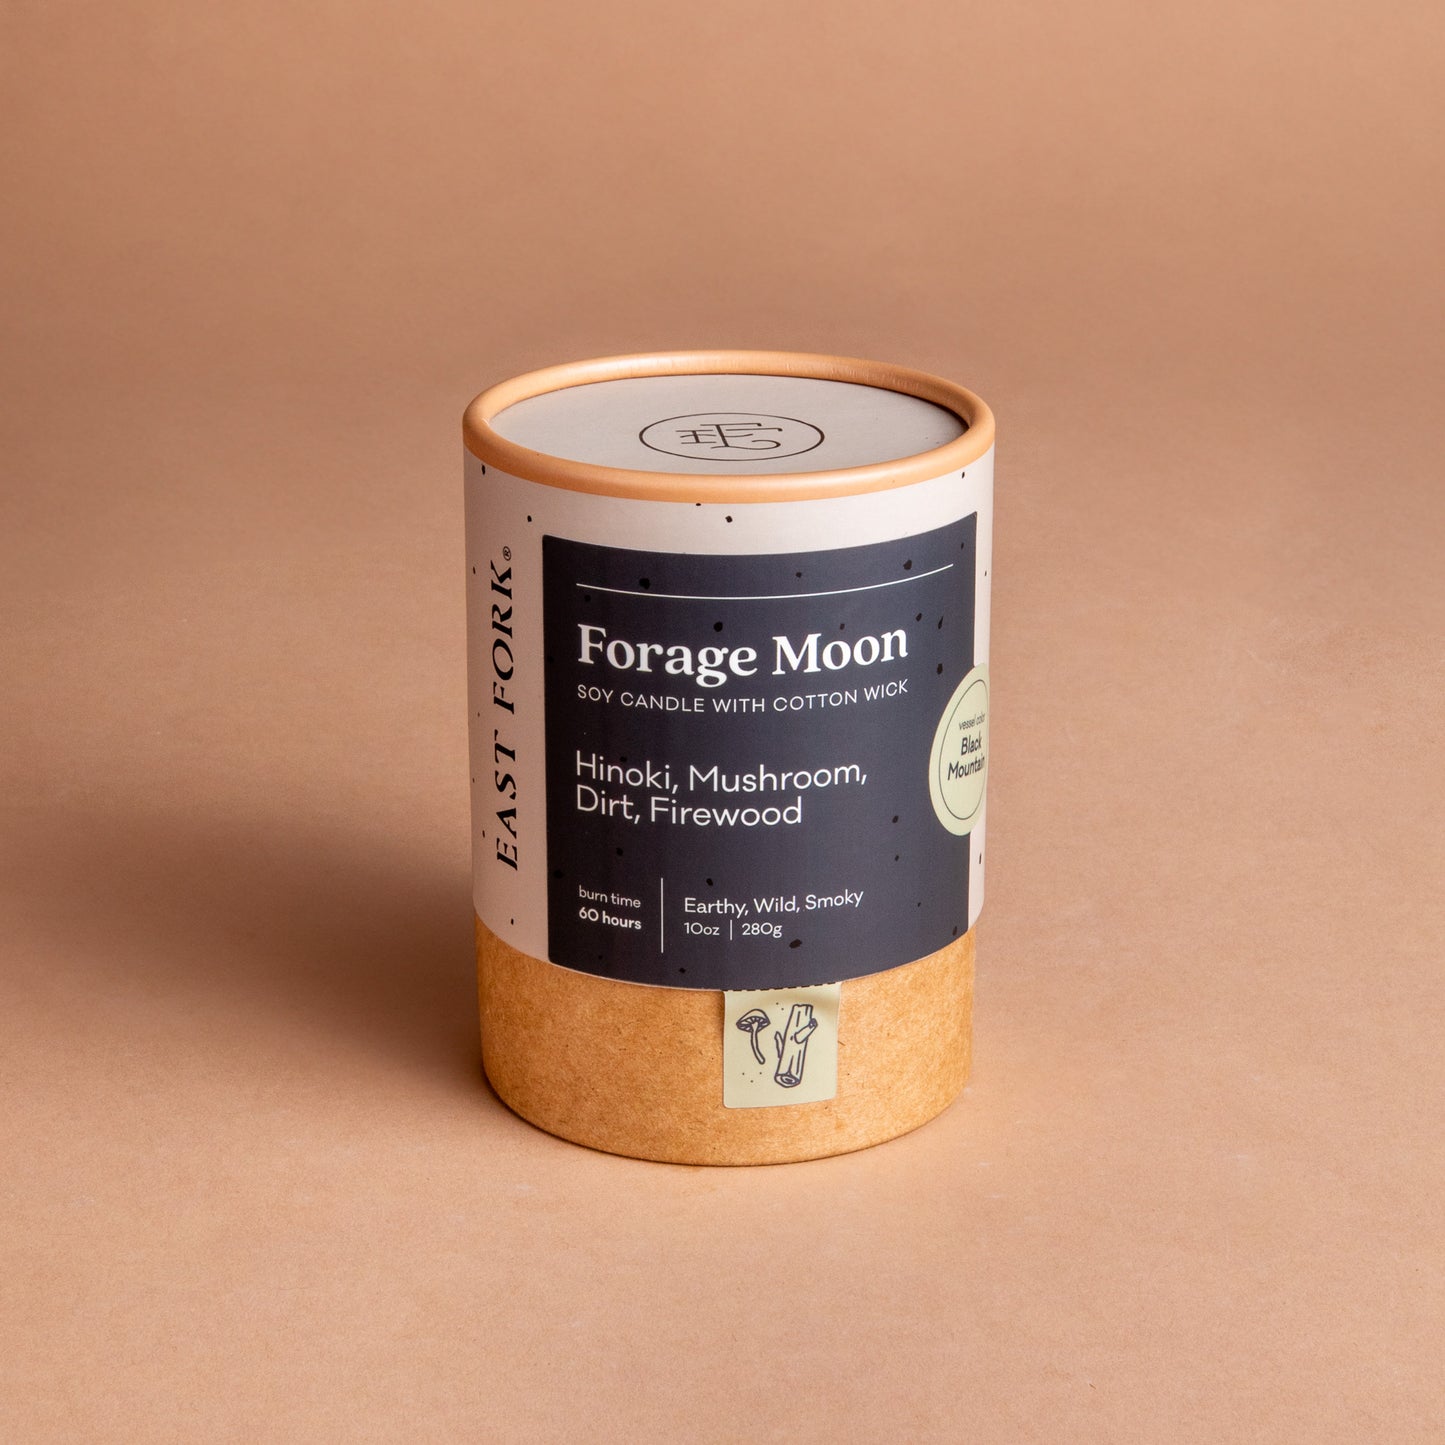 The Candle in Forage Moon